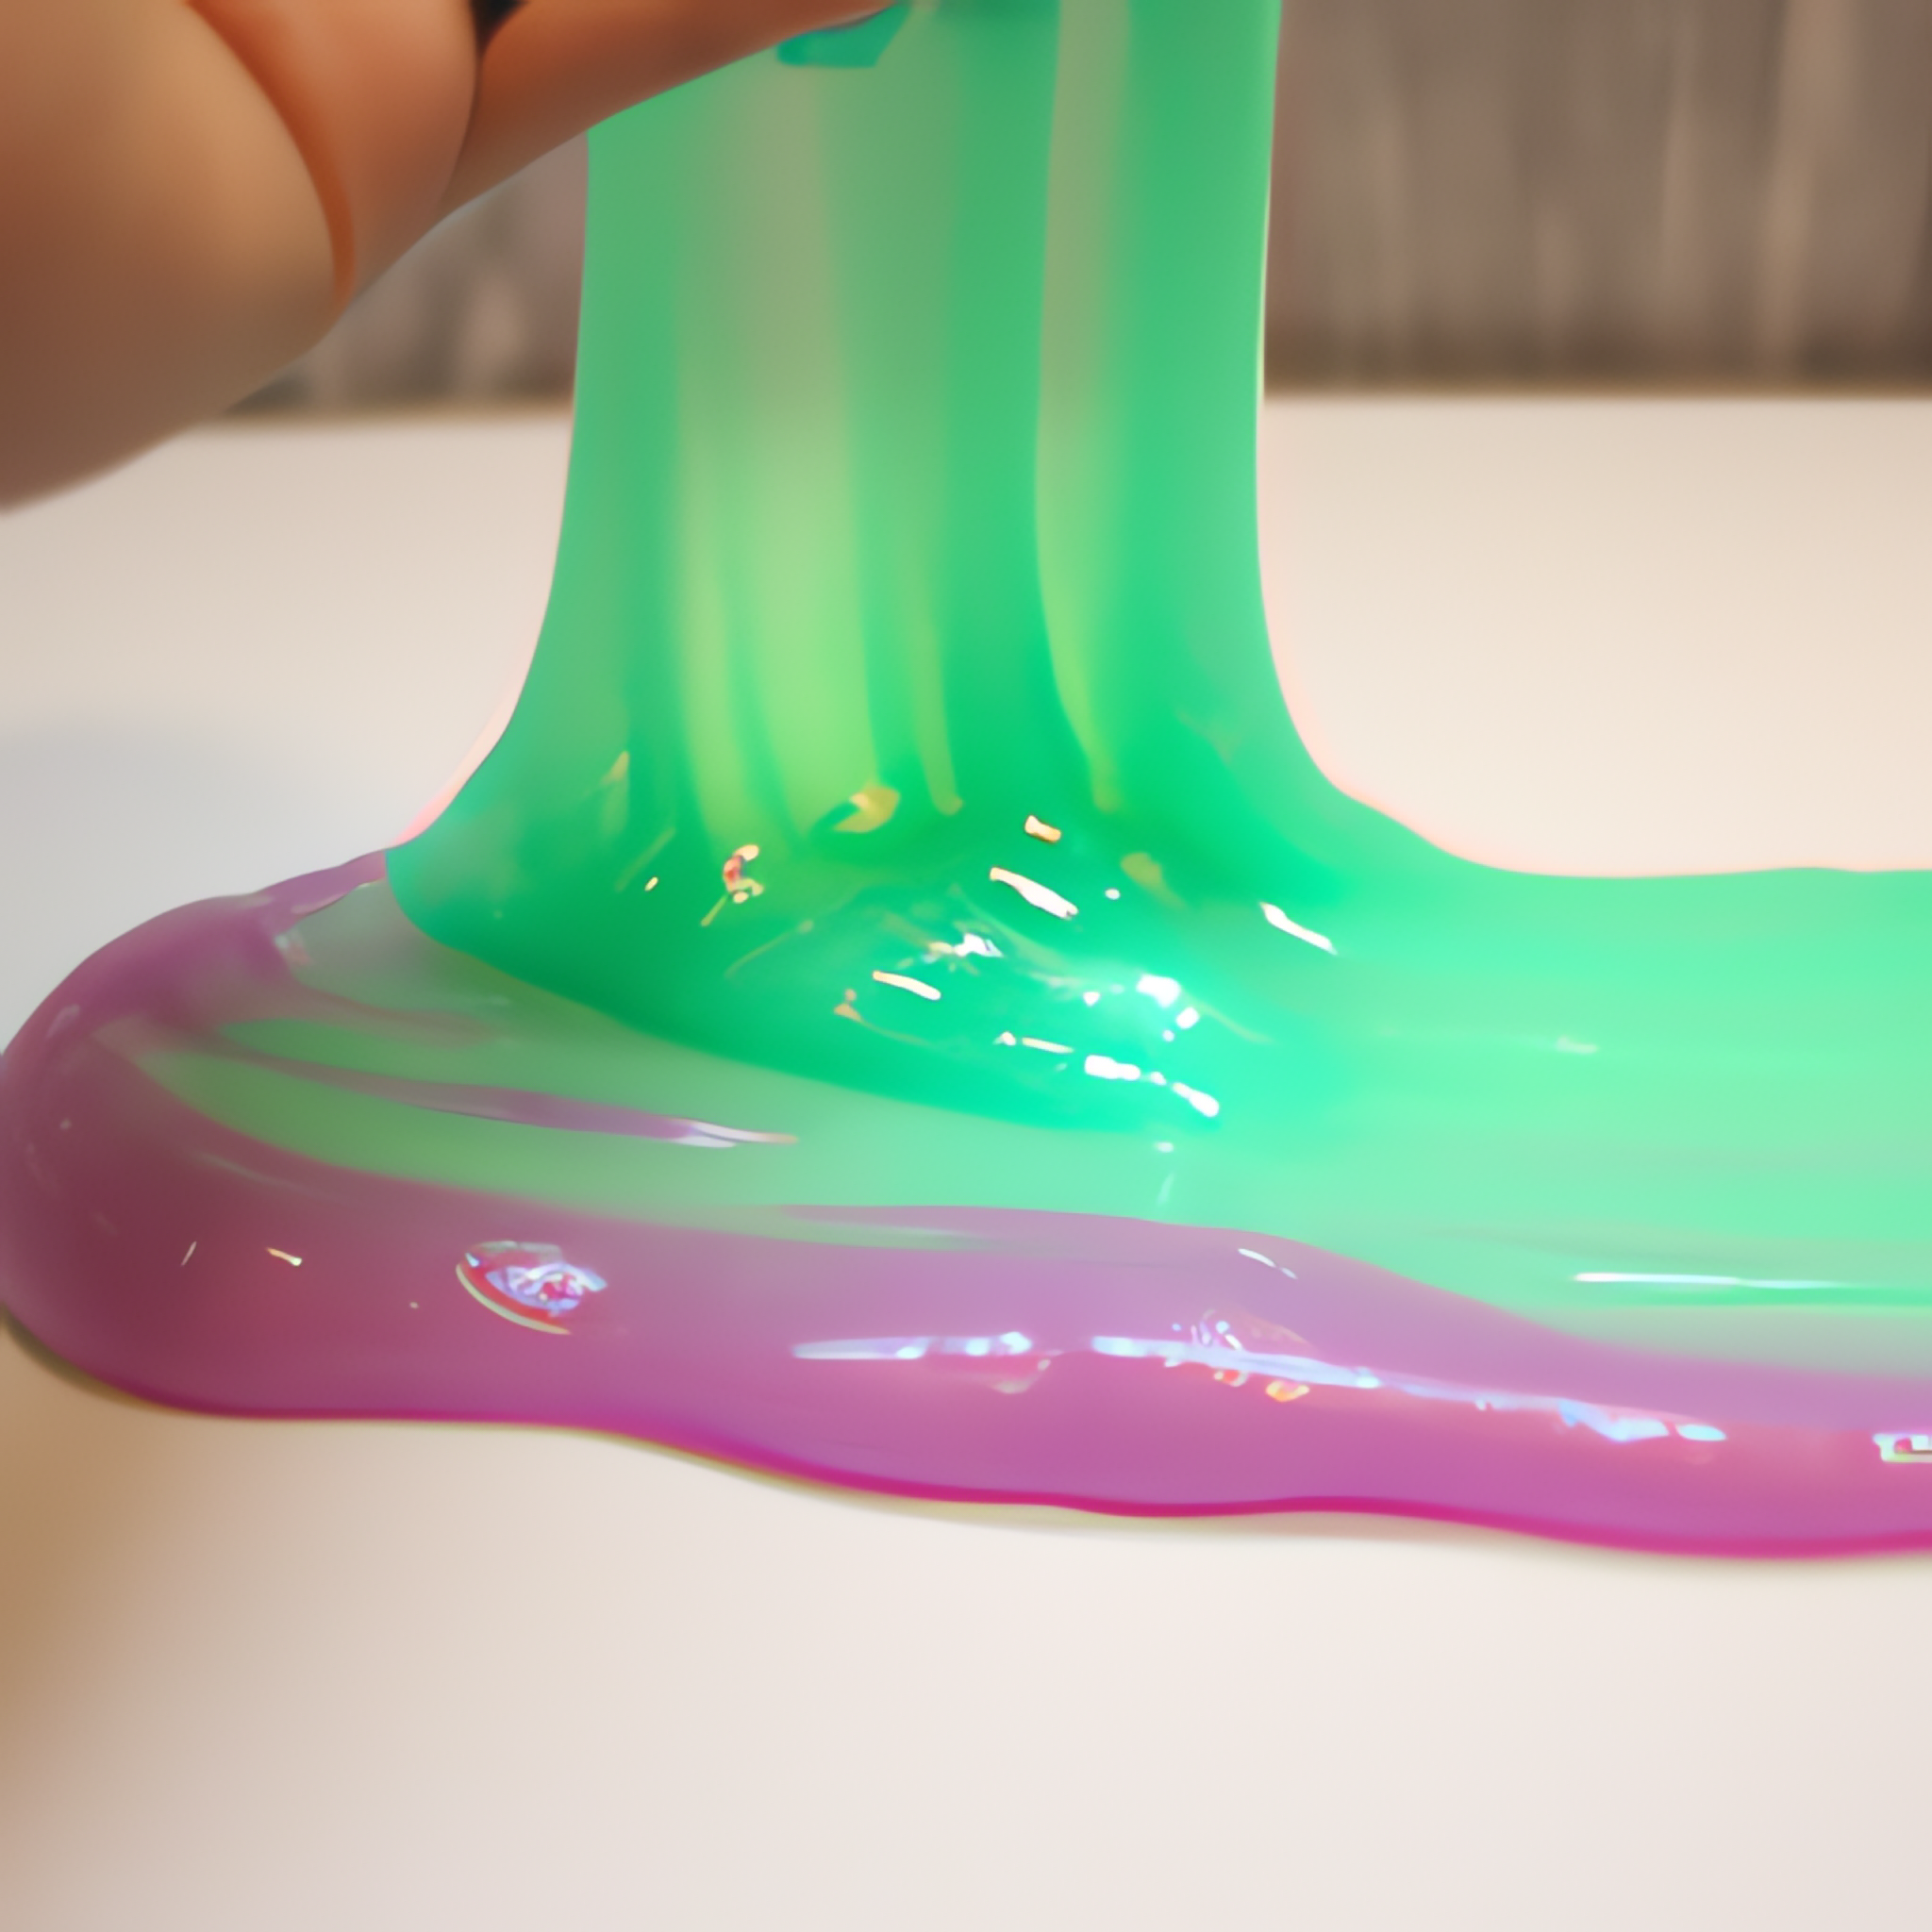 How to Make Car Cleaning Slime? - Quick and Easy Steps